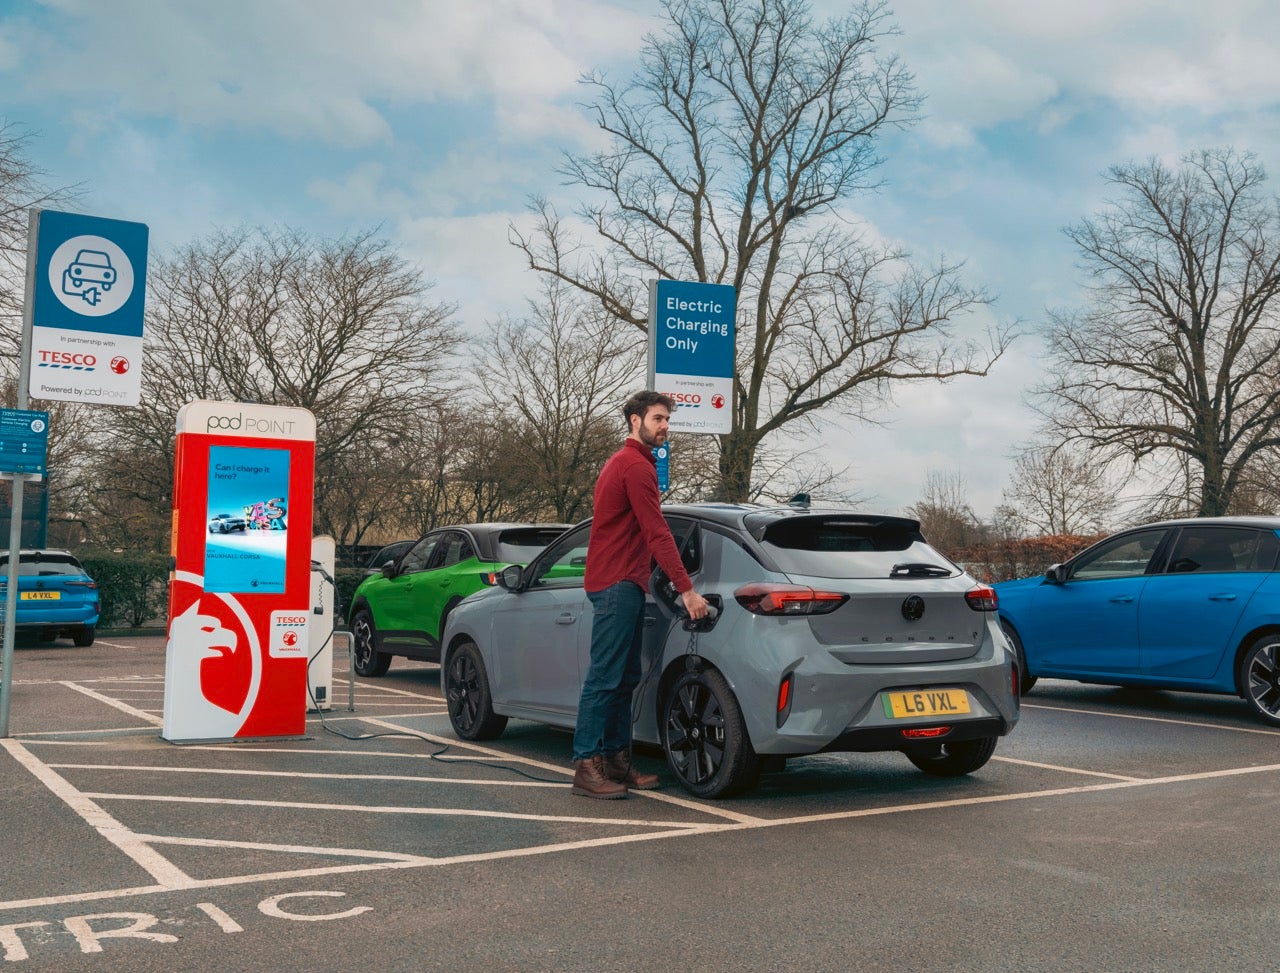 The partnership between Vauxhall and Tesco will further facilitate the UK’s switch to electric vehicles